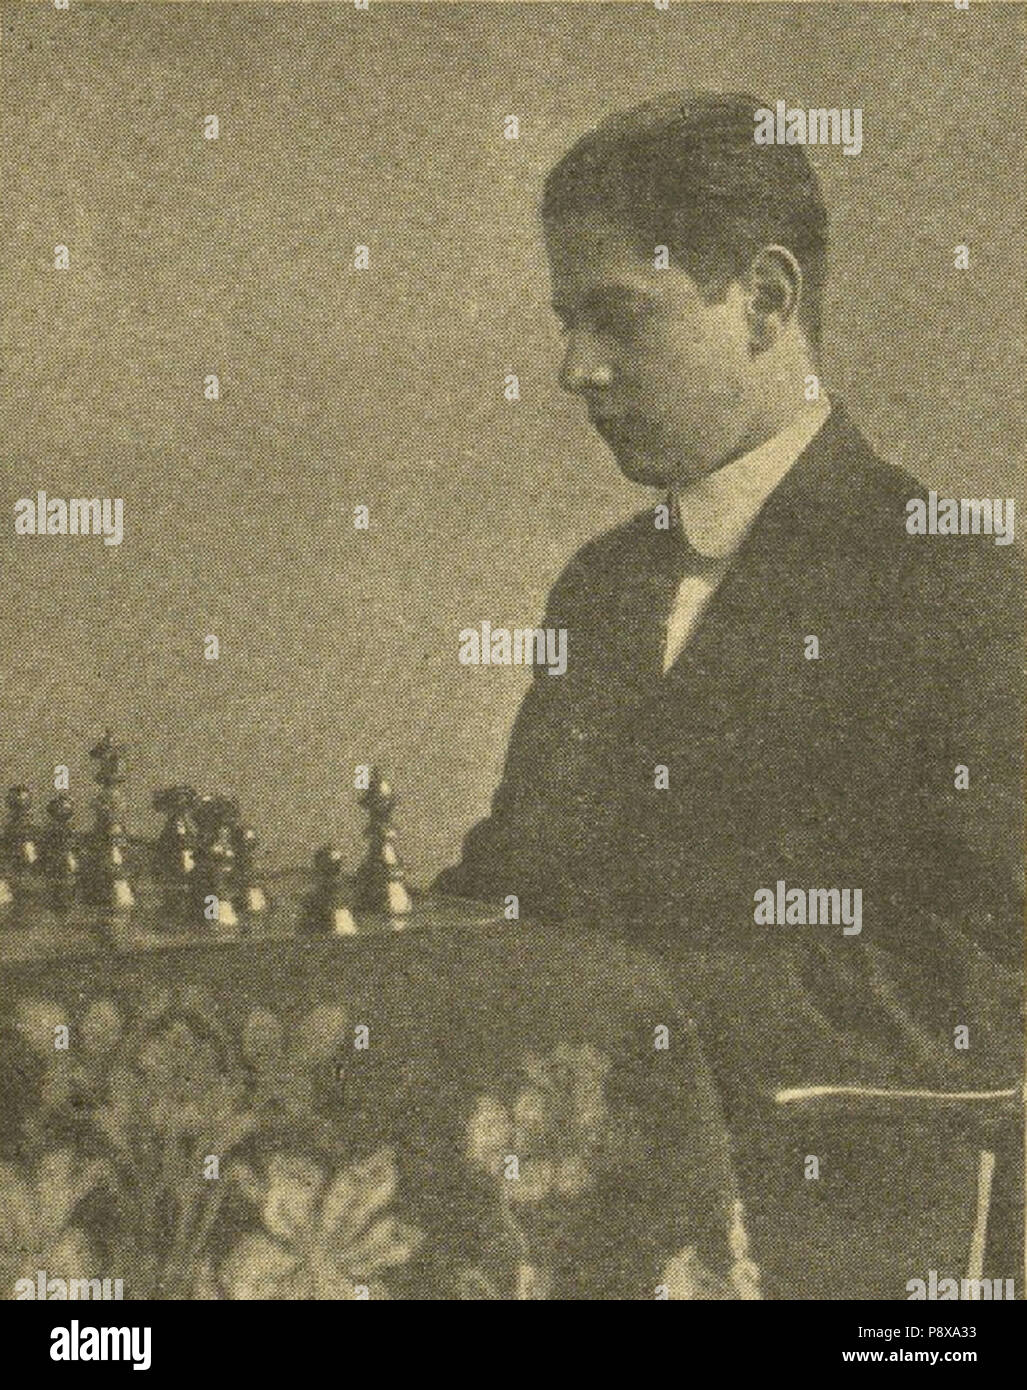 The Parallel Lives of A. Alekhine & J.R. Capablanca